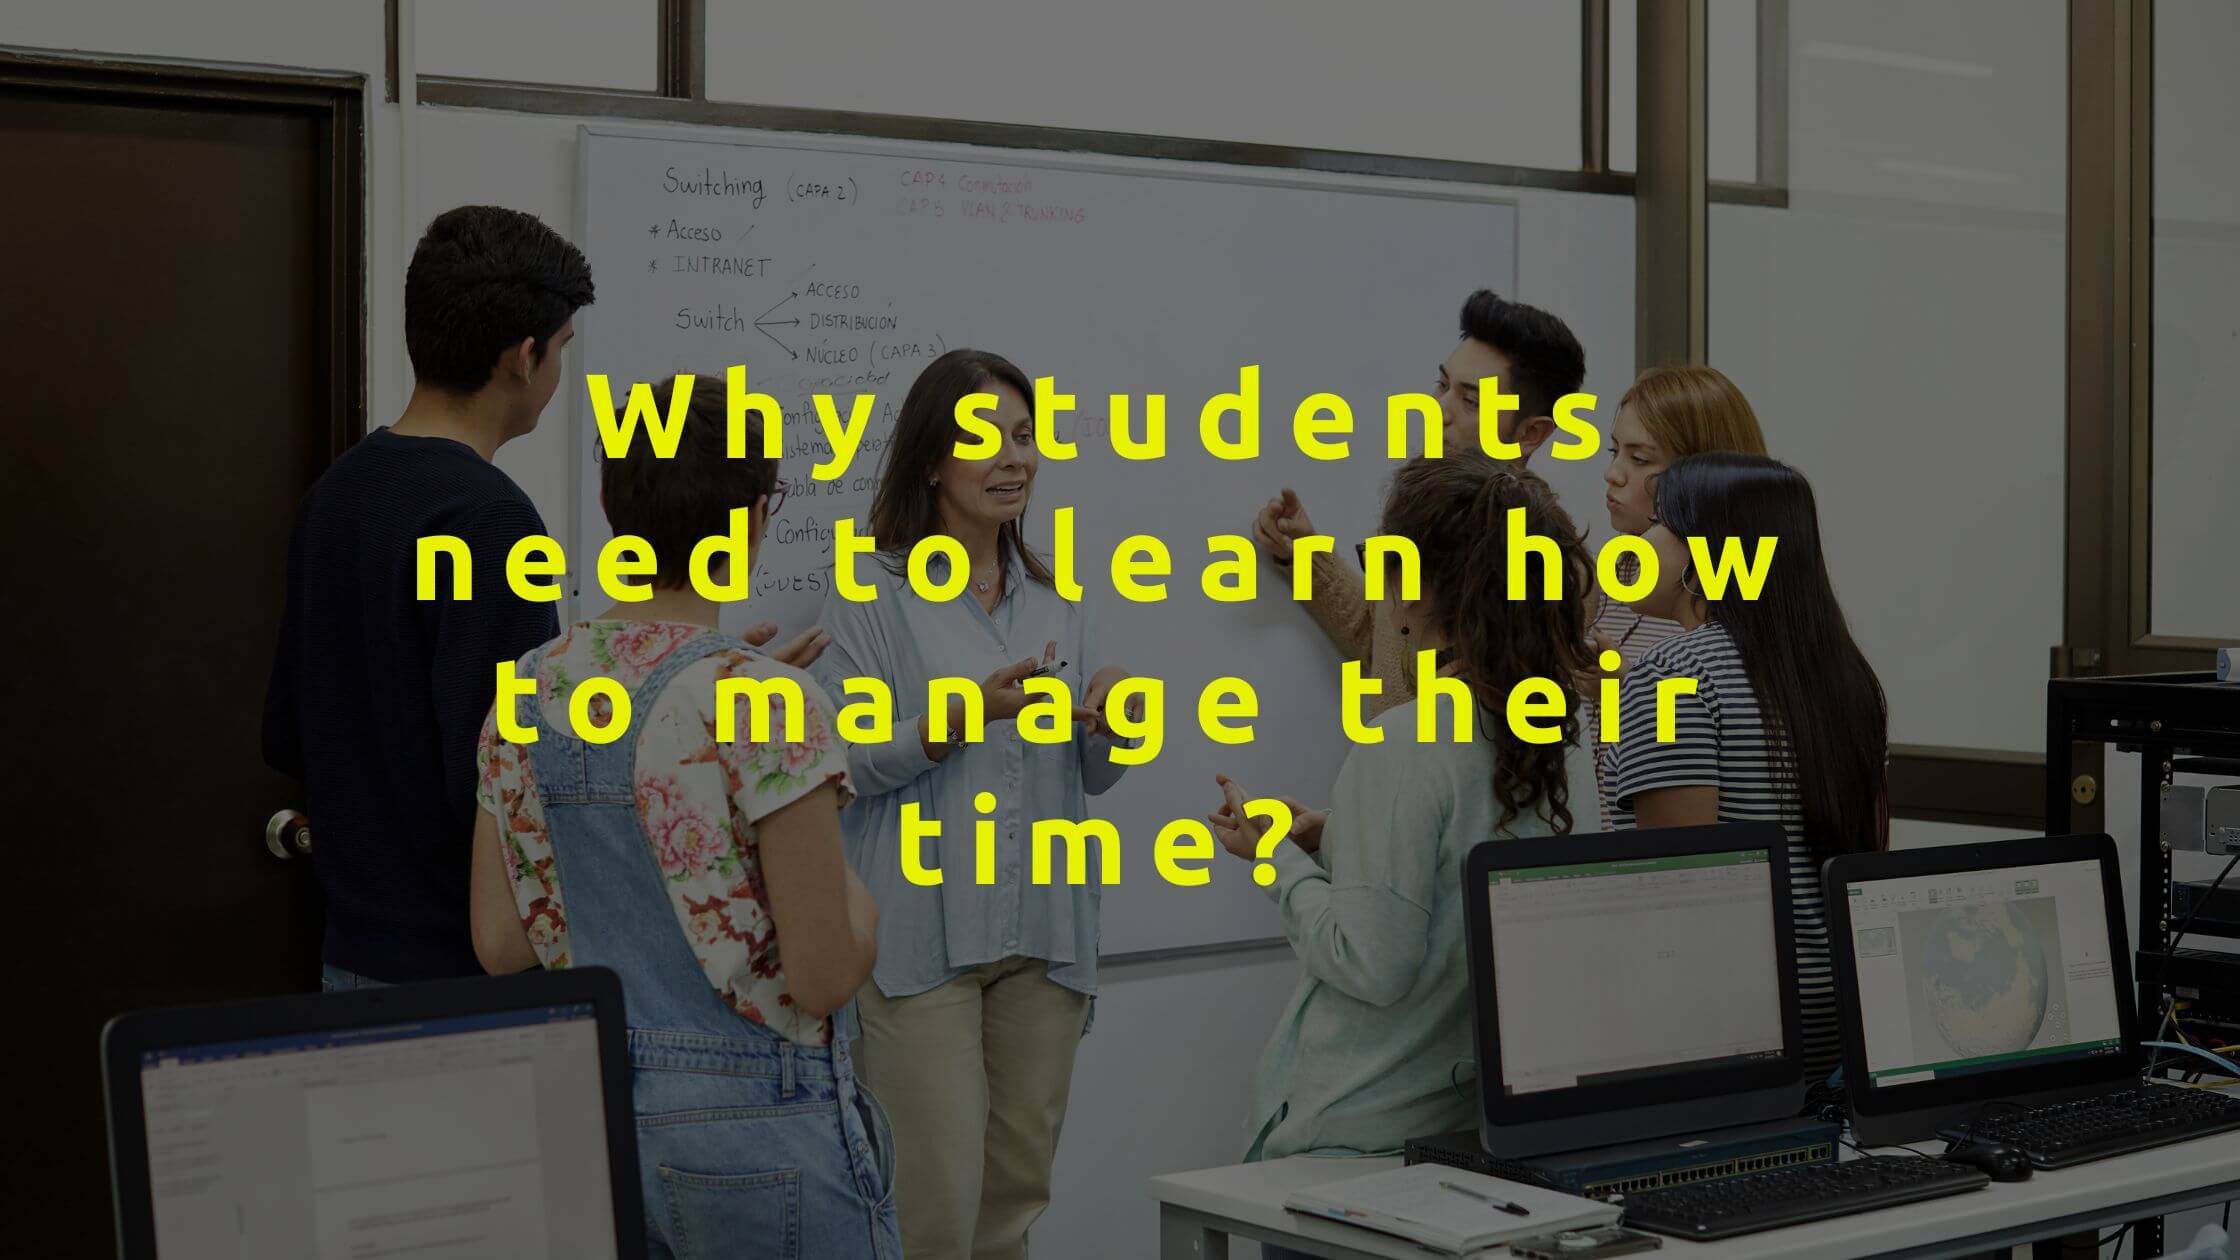 Why students need to learn how to manage their time